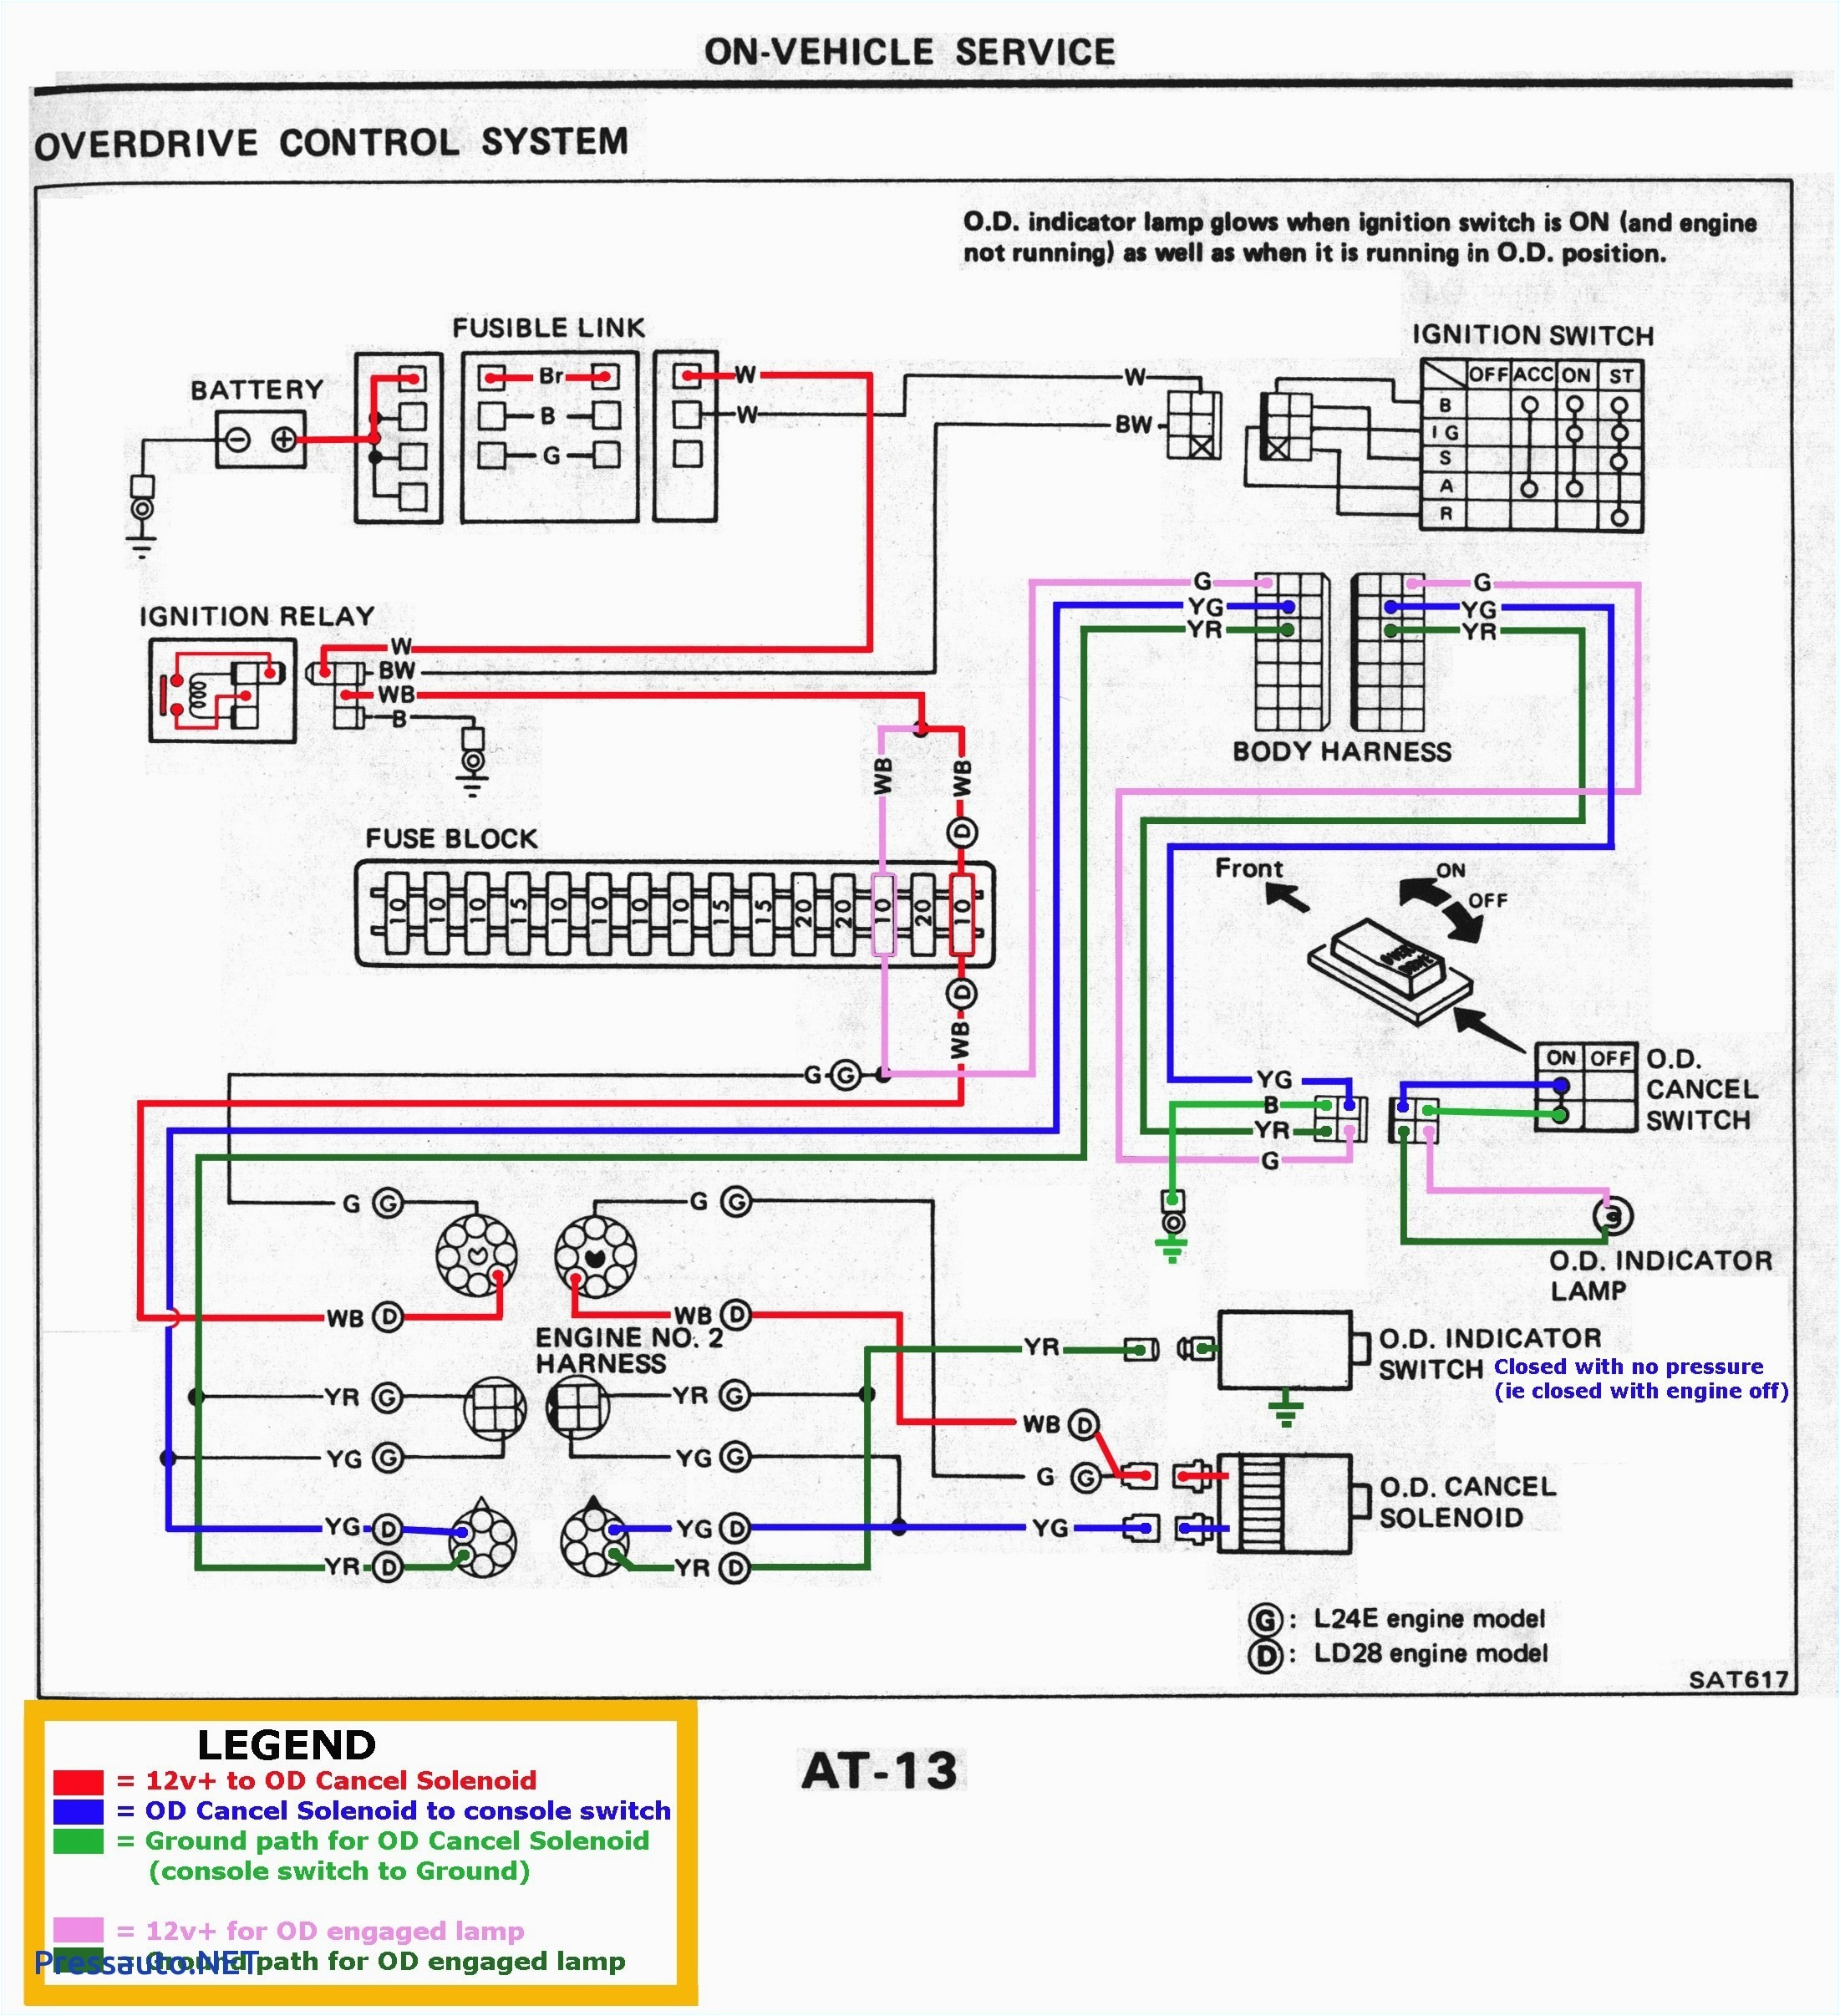 dimmer diagrams advance wiring xi025c100v036dnm1 use wiring diagram abbreviations for toyota wiring diagram wiring diagrams global